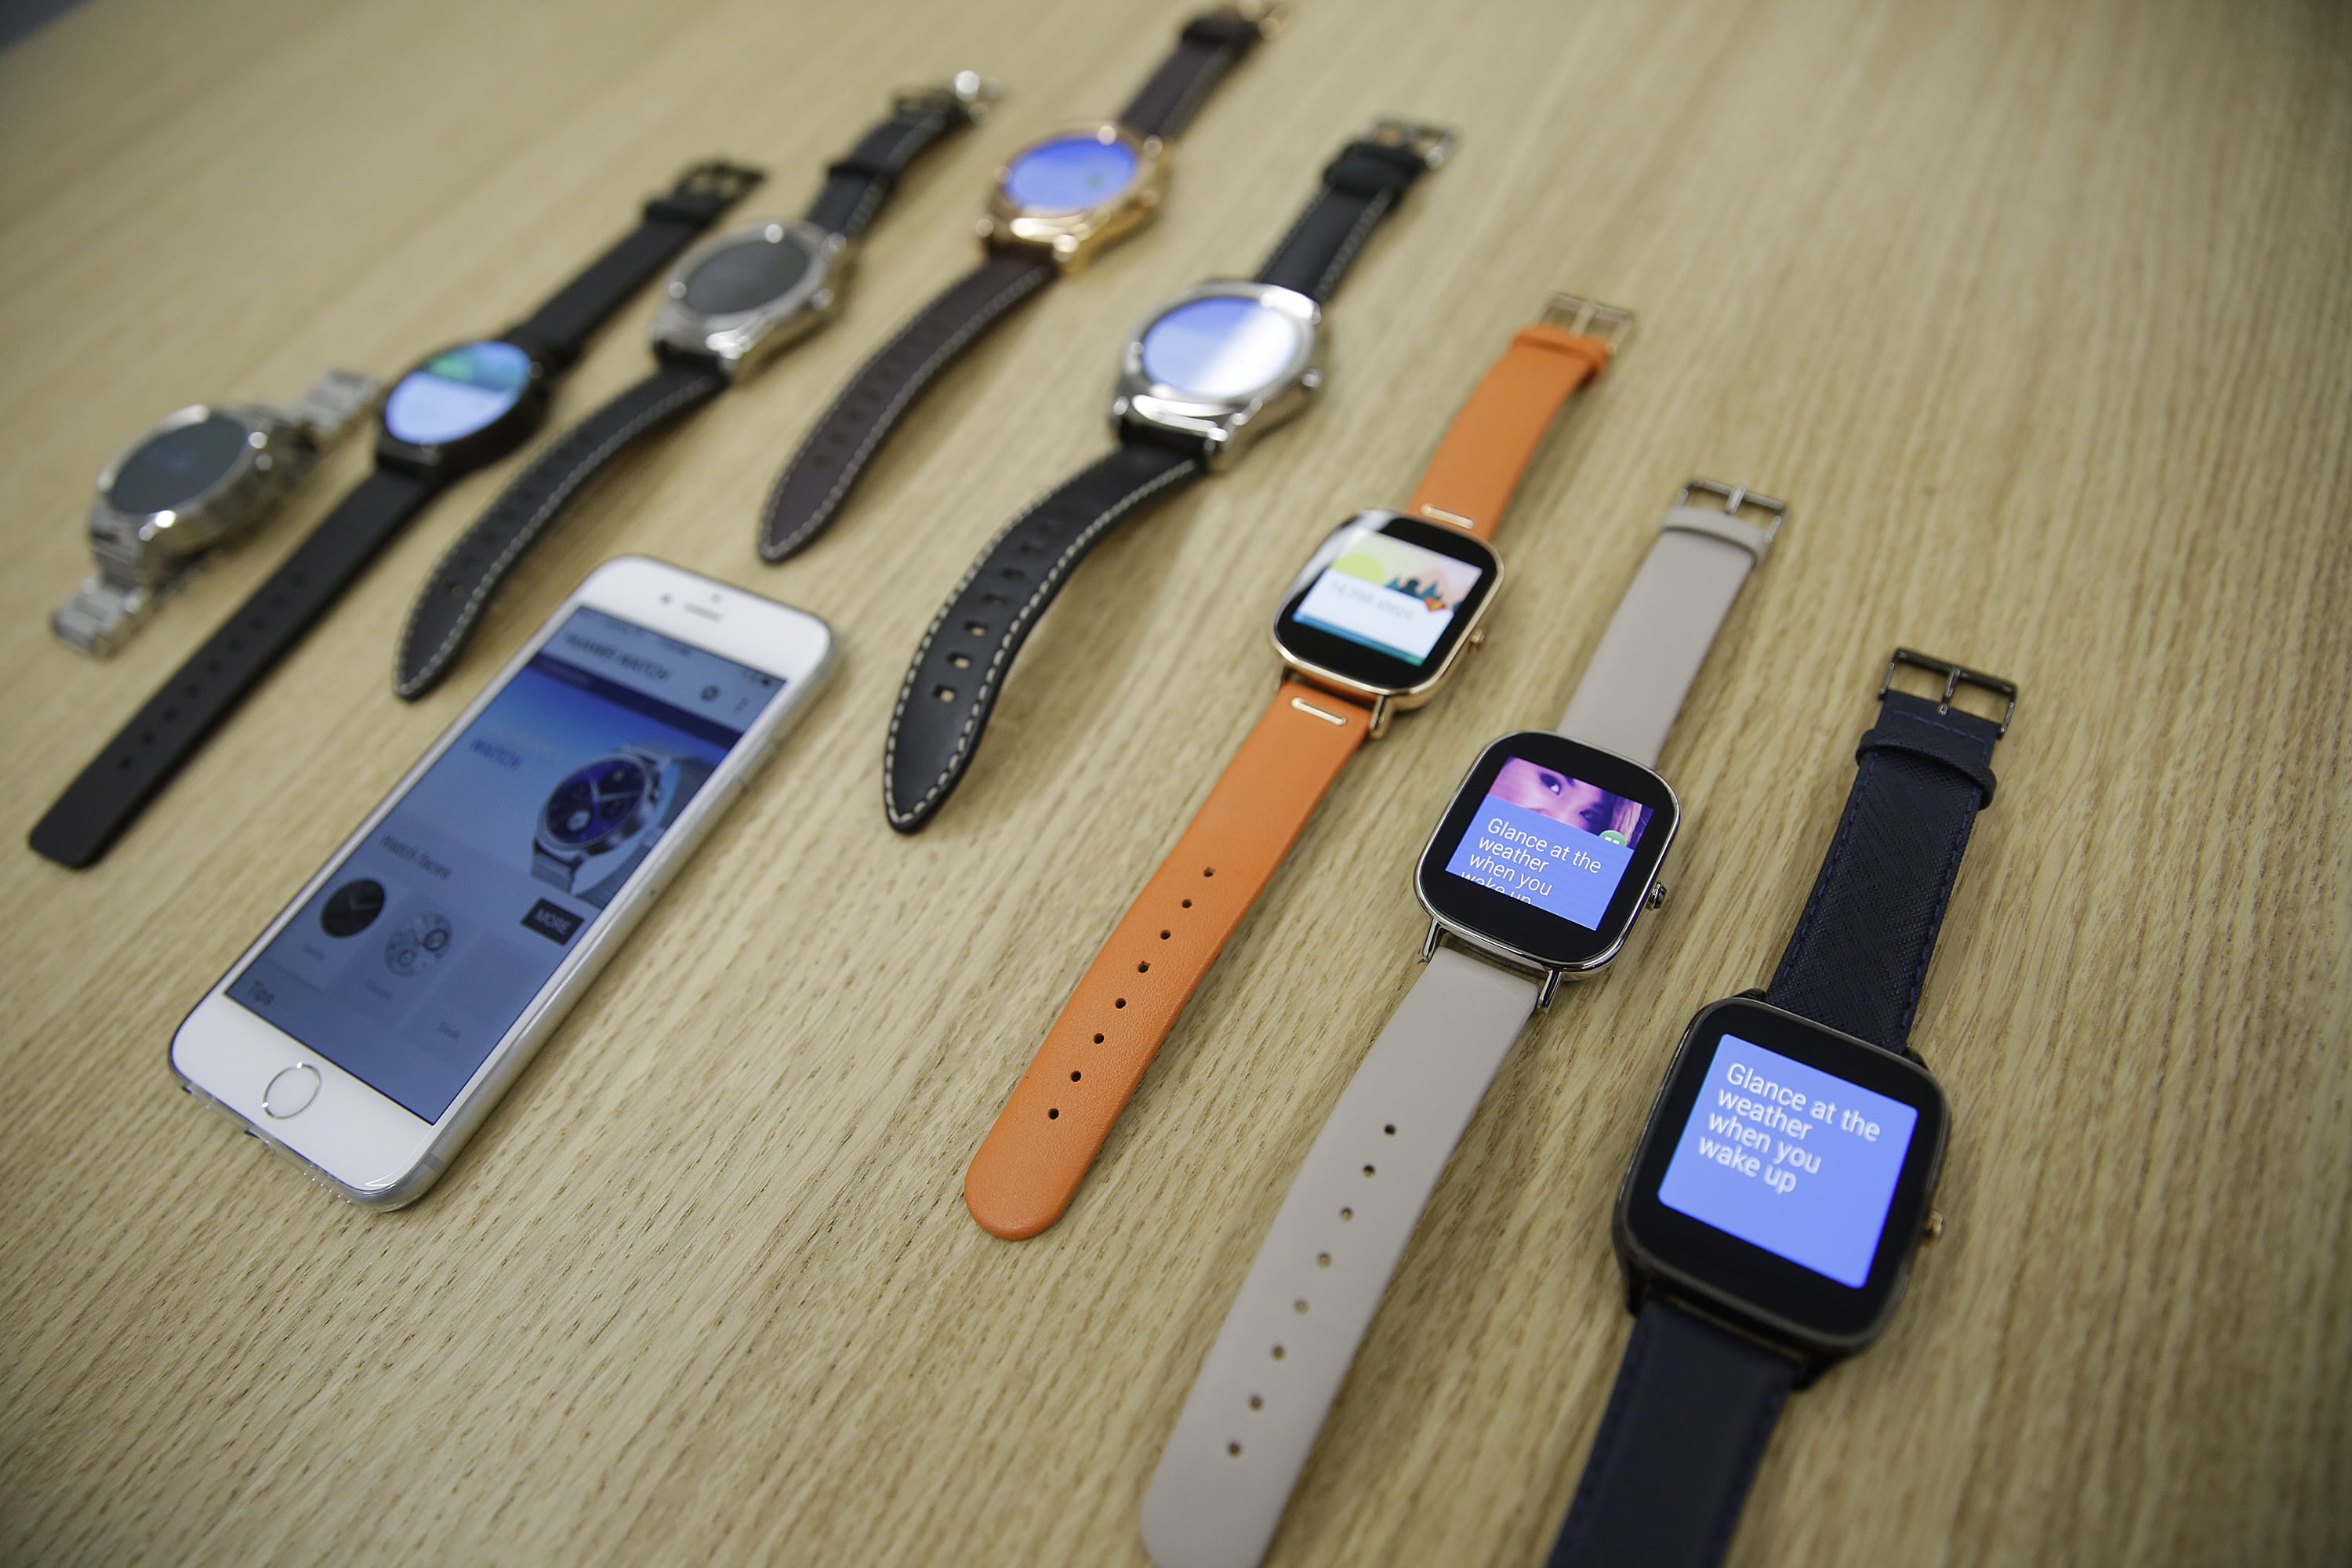 Google is introducing an application that will connect Android smartwatches with Apple's iPhone, escalating the rivals' battle to strap their technology on people's wrists.